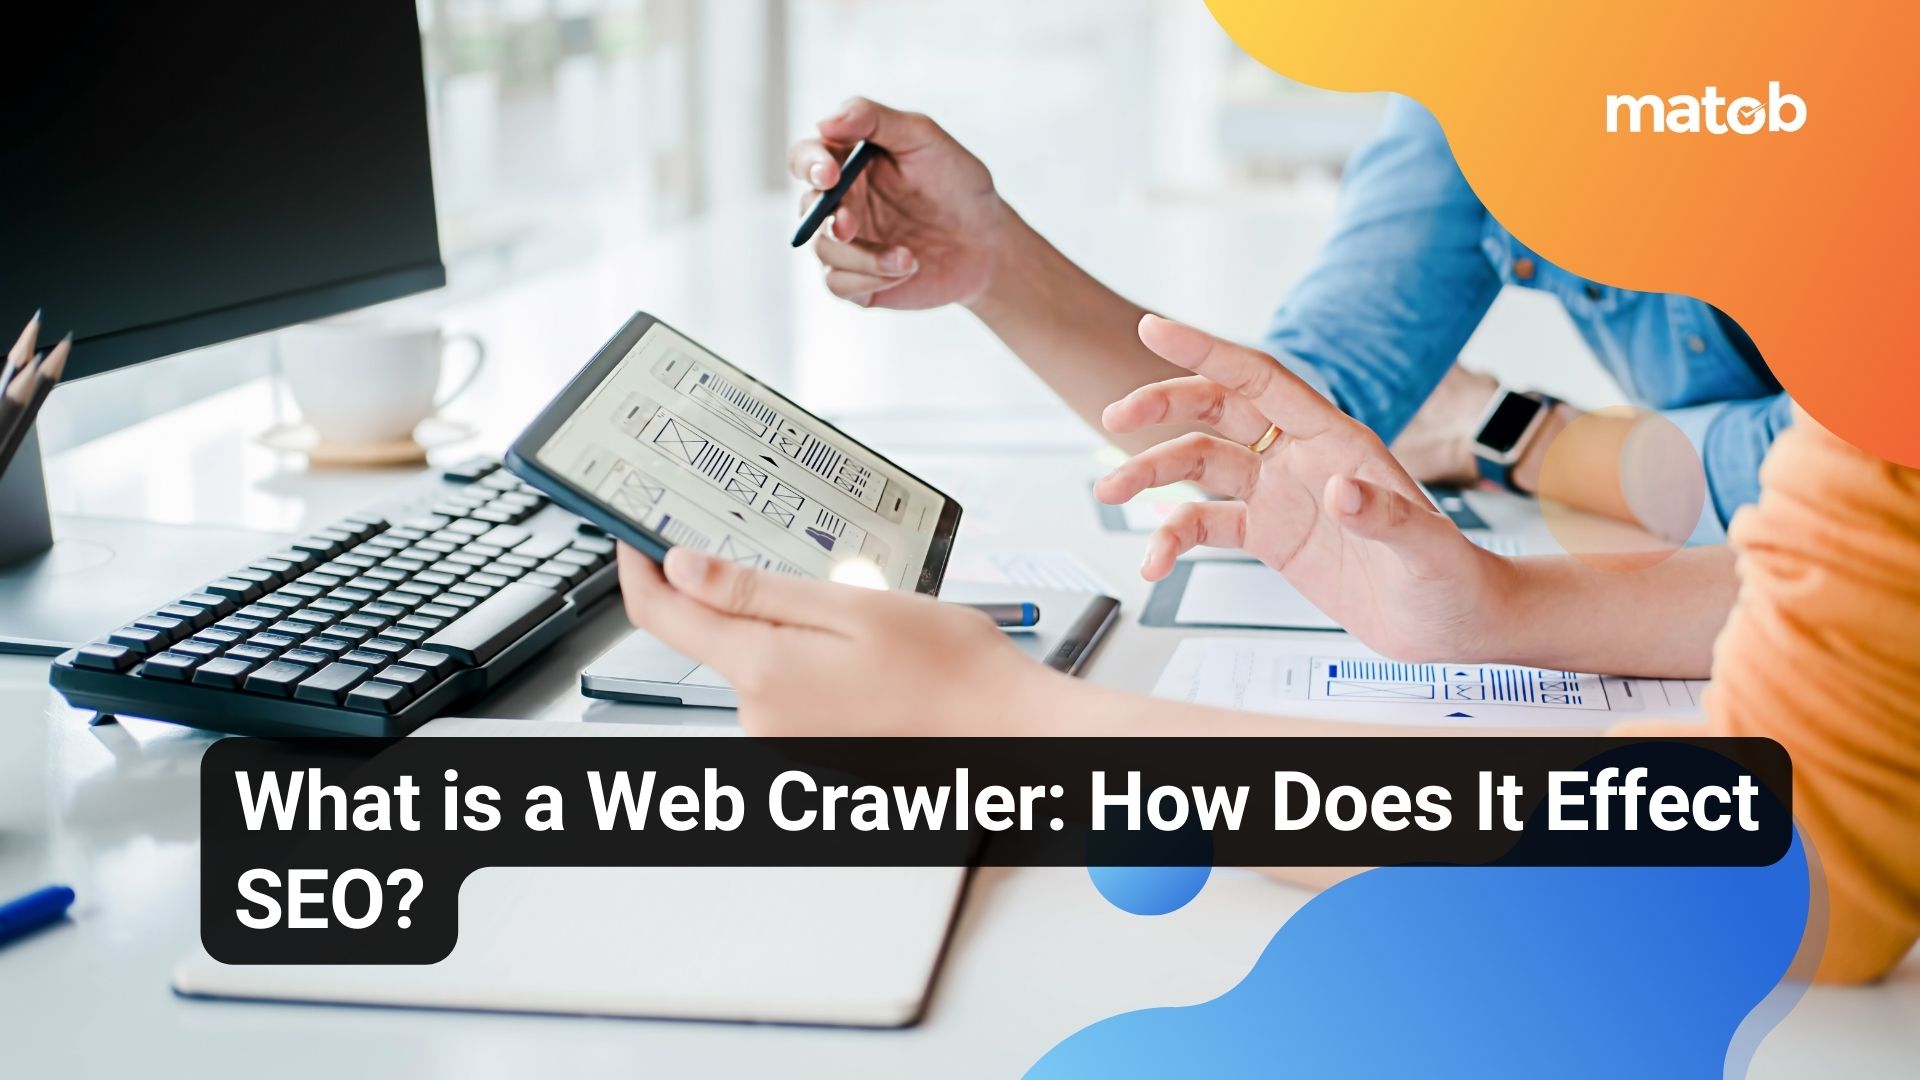 What is a Web Crawler: How Does It Effect SEO?